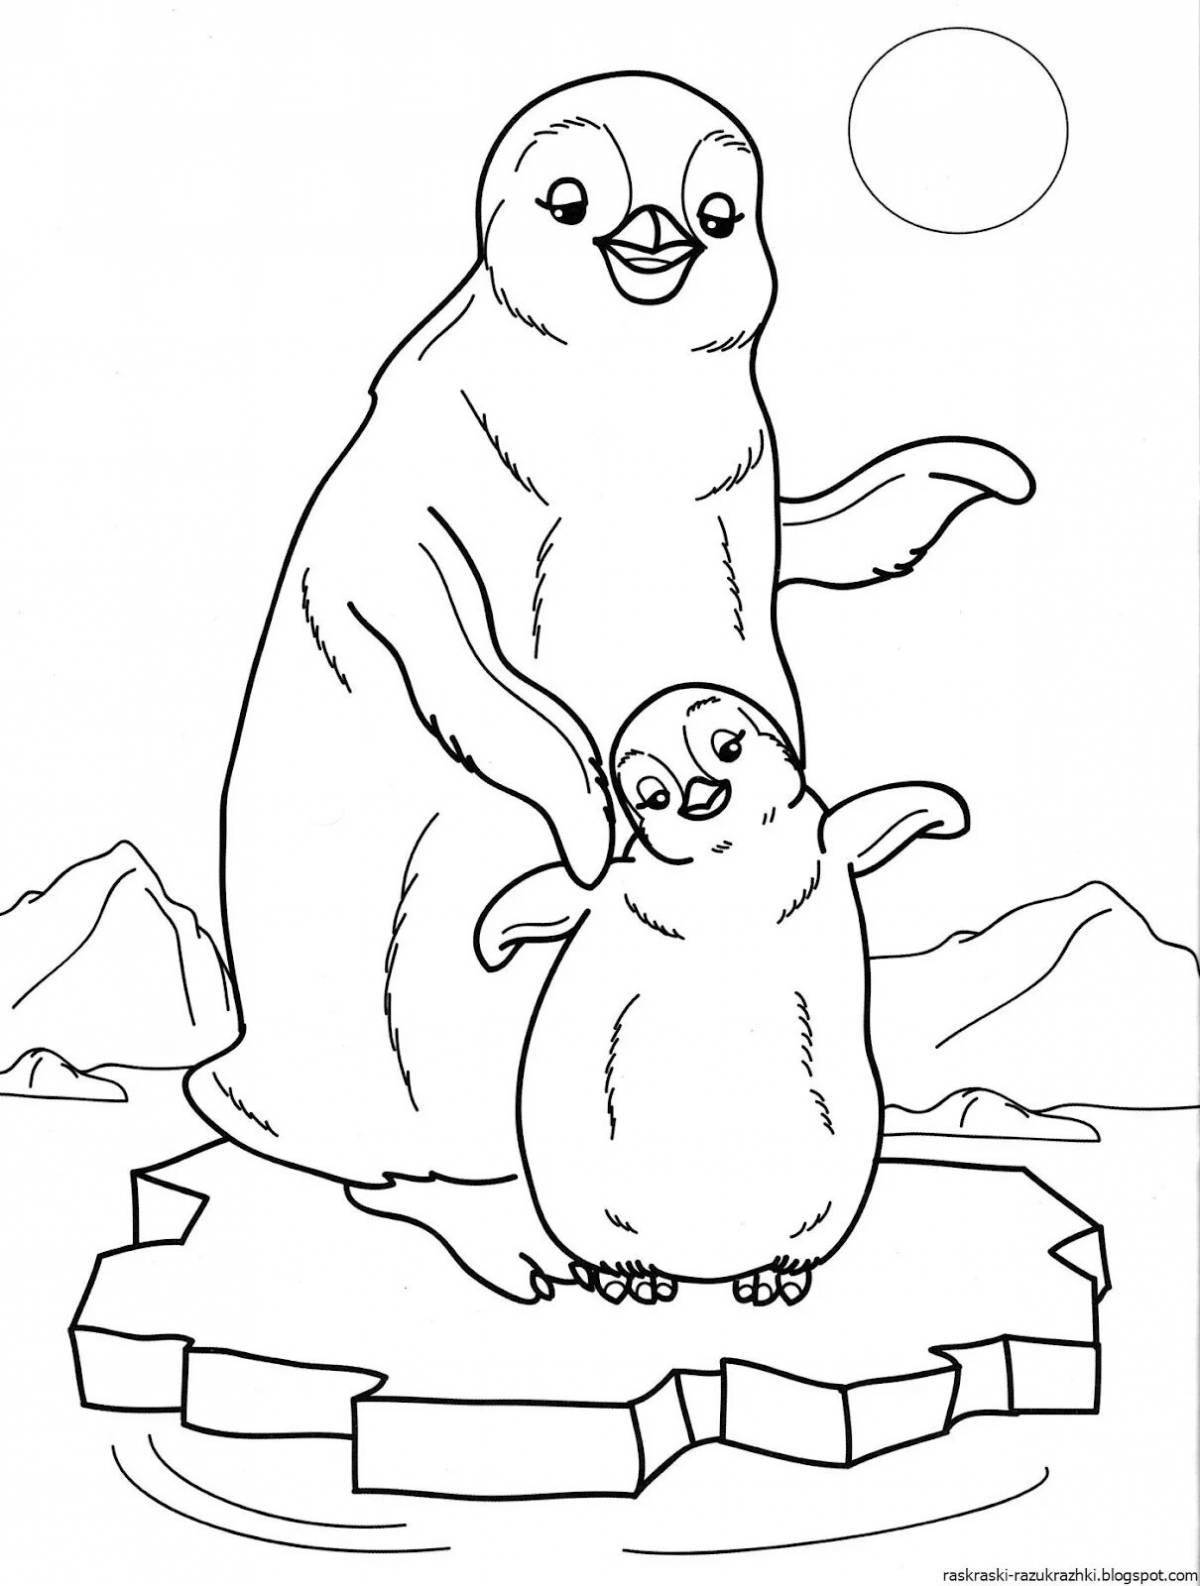 Antarctica fun coloring book for kids 6-7 years old